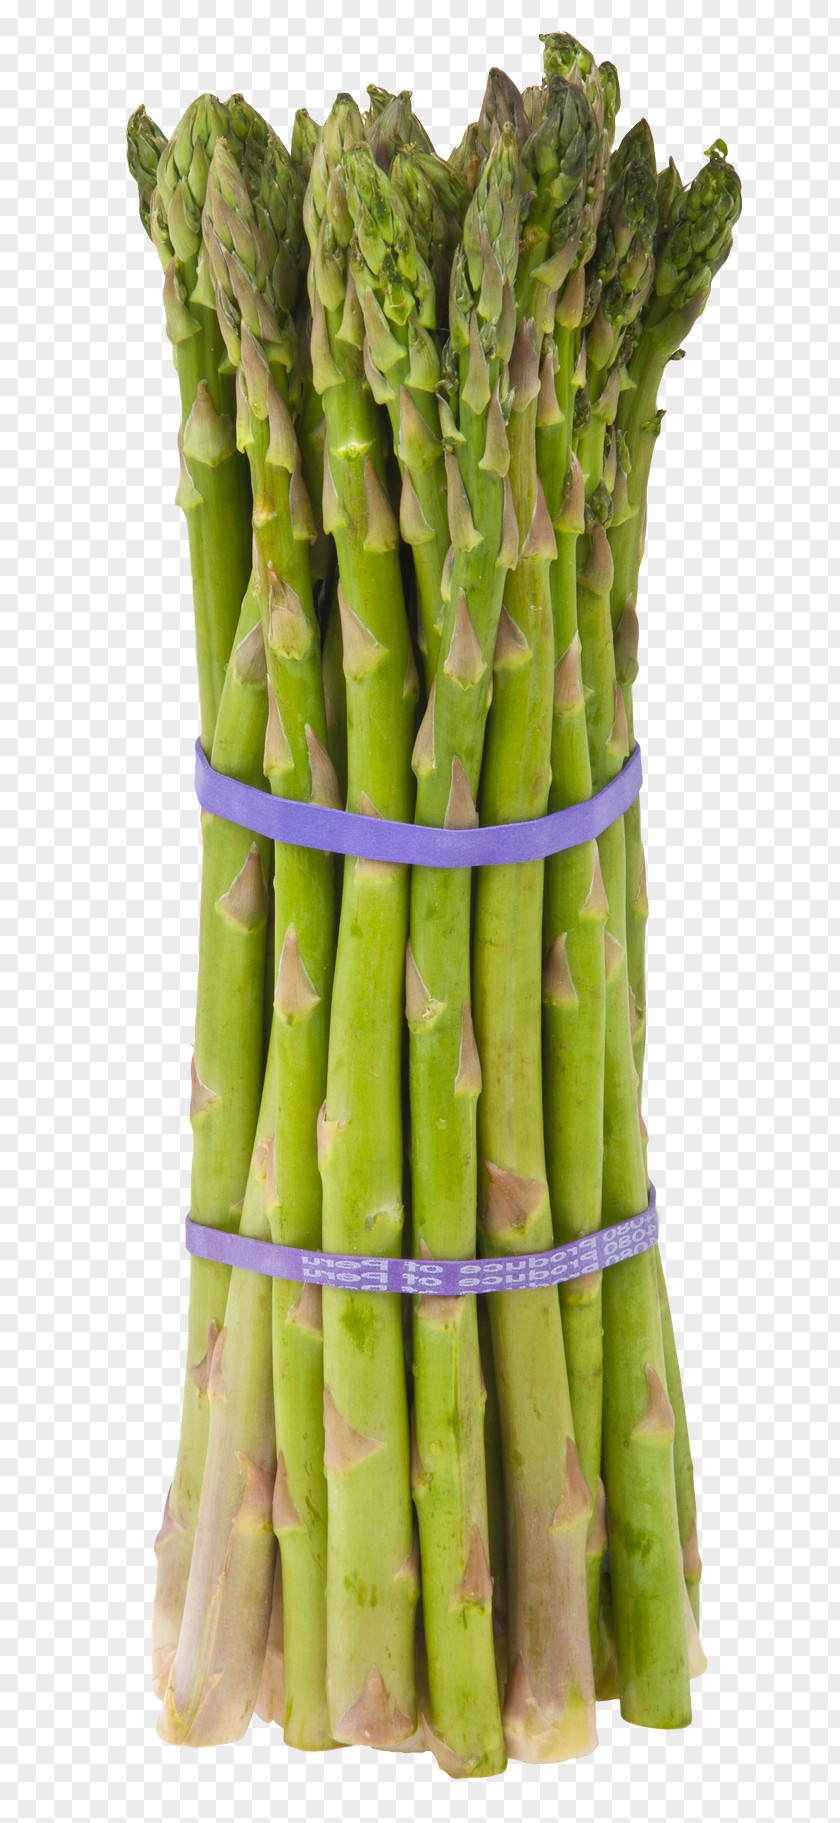 Asparagus Cream Of Soup Vegetable Cooking Eating PNG